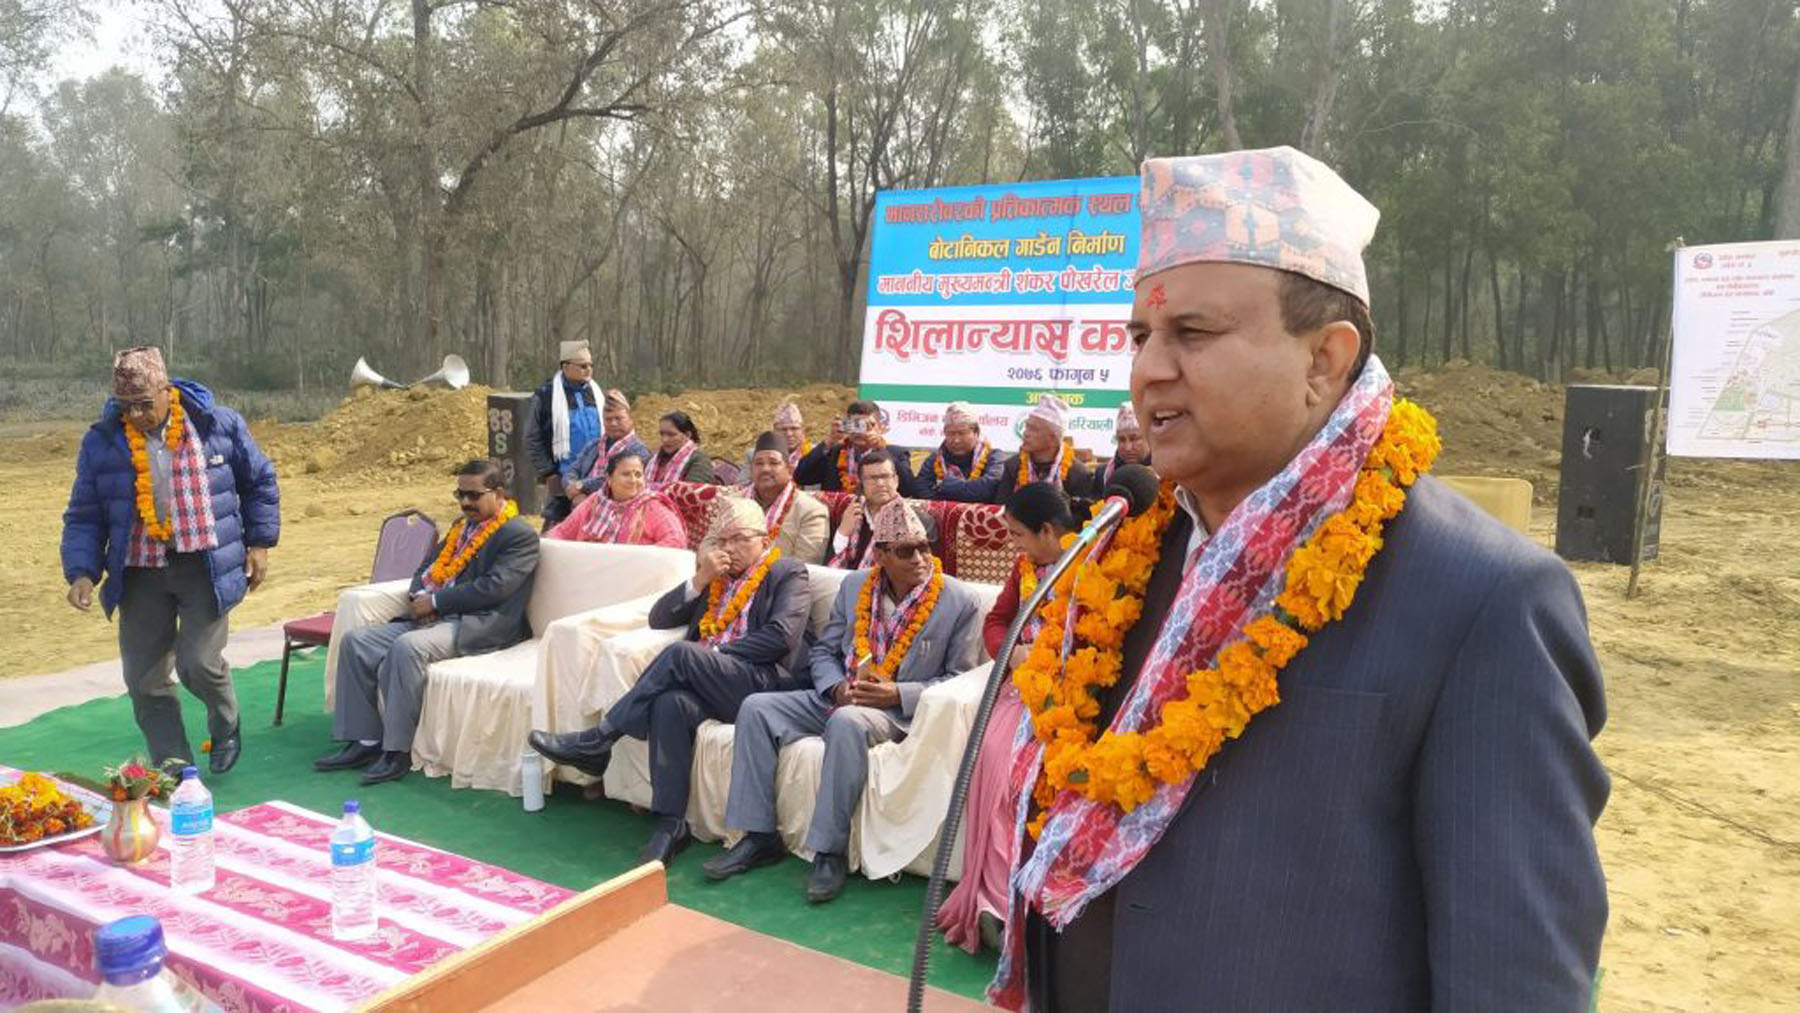 chief-minister-pokhrel-lays-emphasis-on-physical-infrastructure-for-tourism-promotion